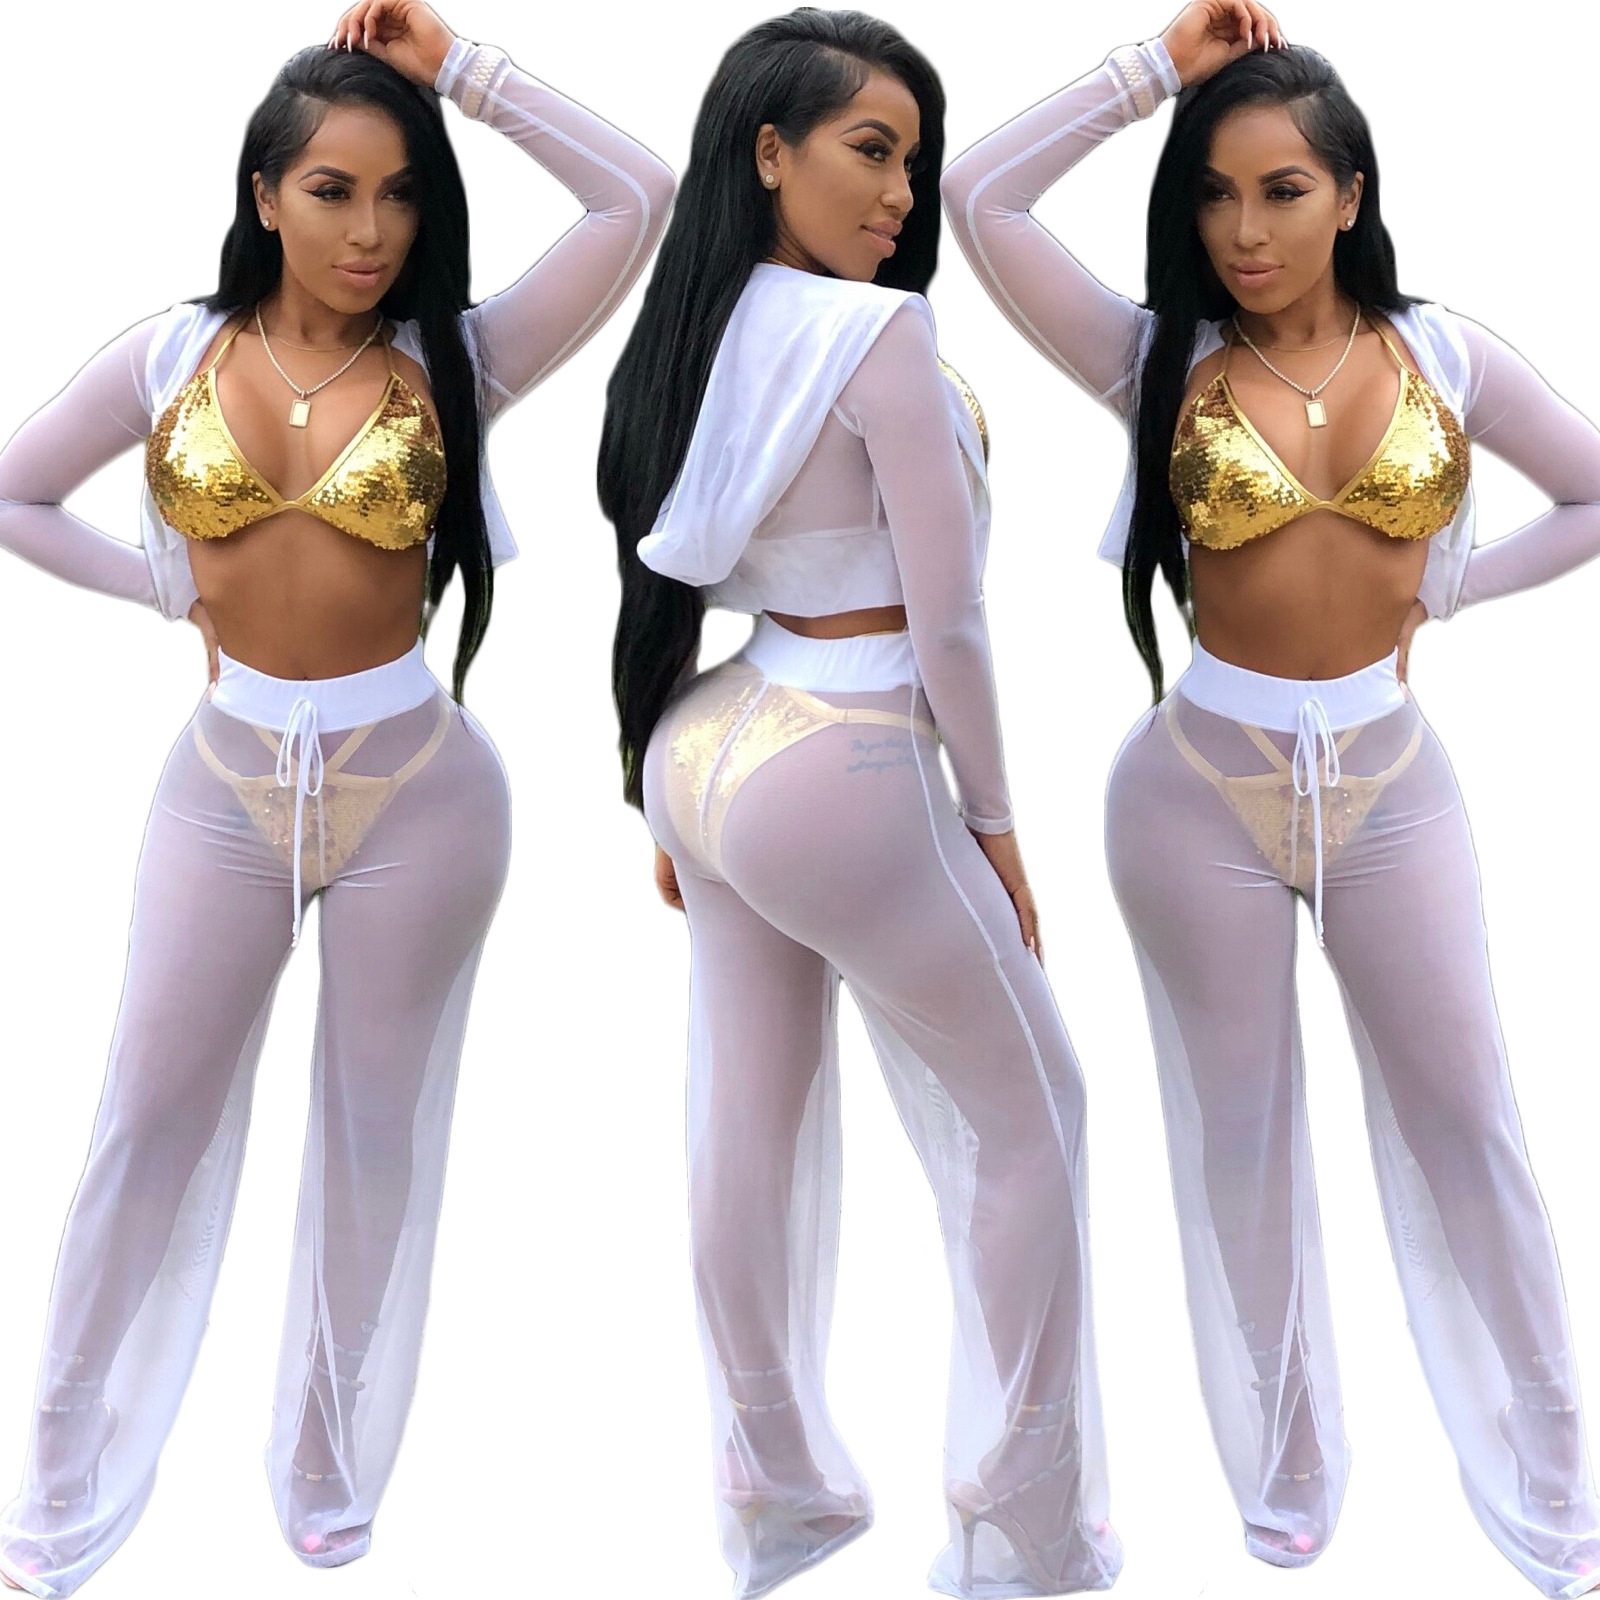 NEW * Yelete Women Side Colored Mesh Active Wear Set - Gray and